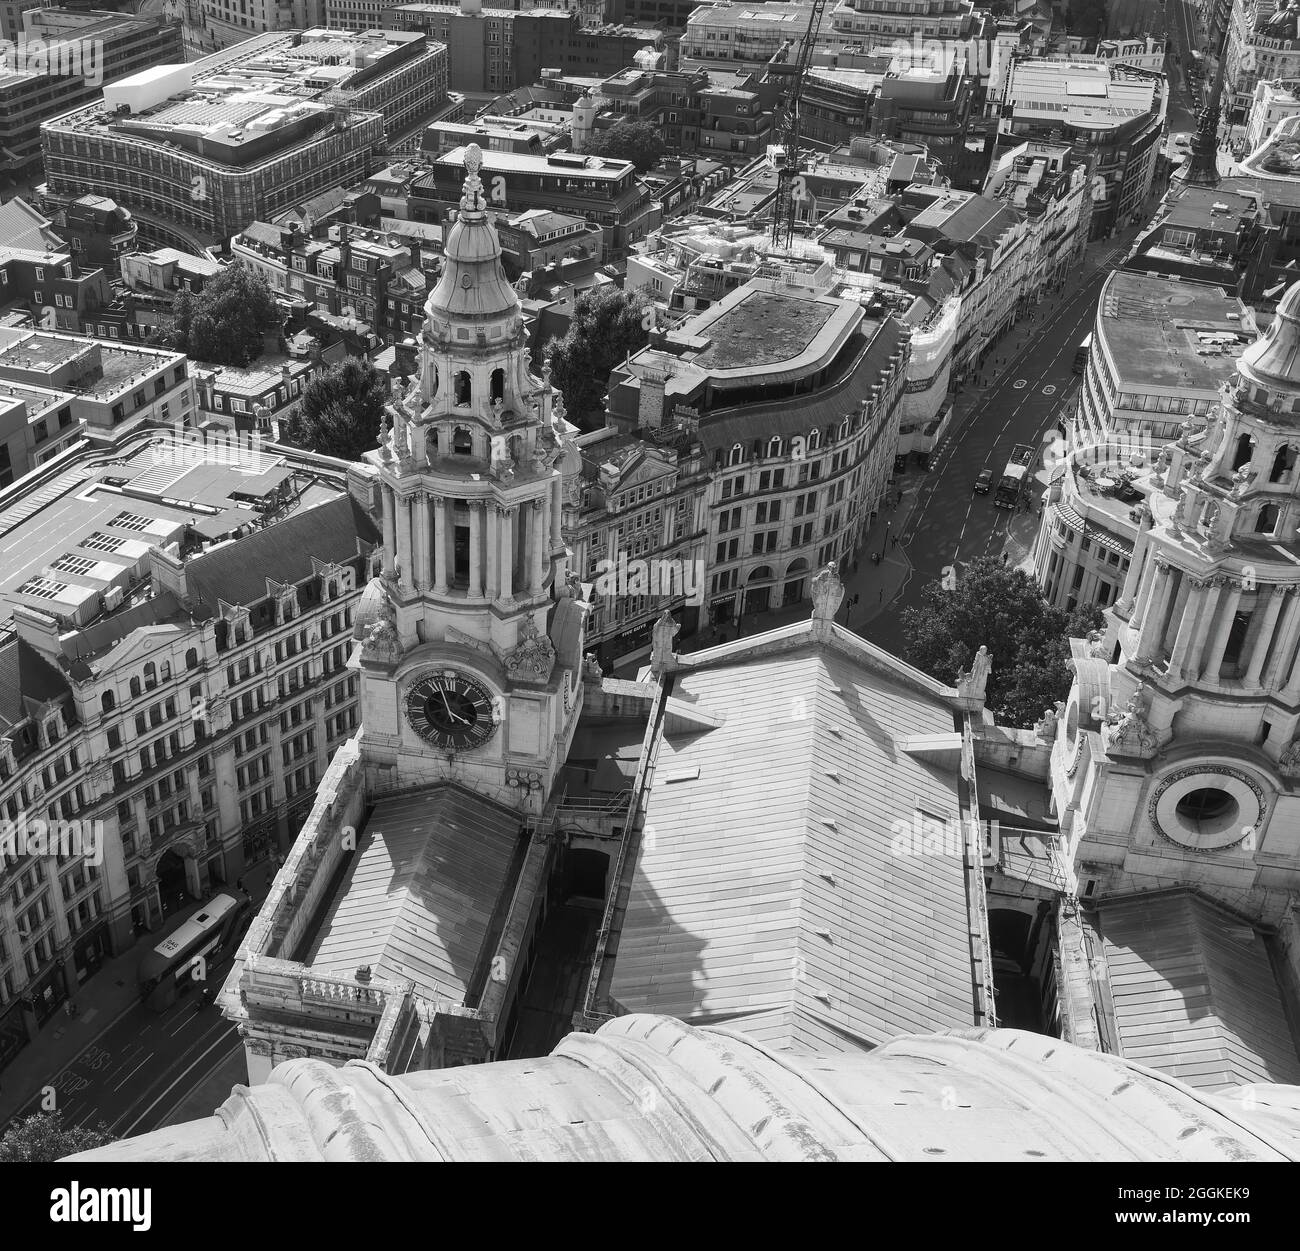 London, Greater London, England, August 24 2021: View from St Pauls Cathedral including its buildings on St Pauls Churchard and Ludgate Hill Stock Photo